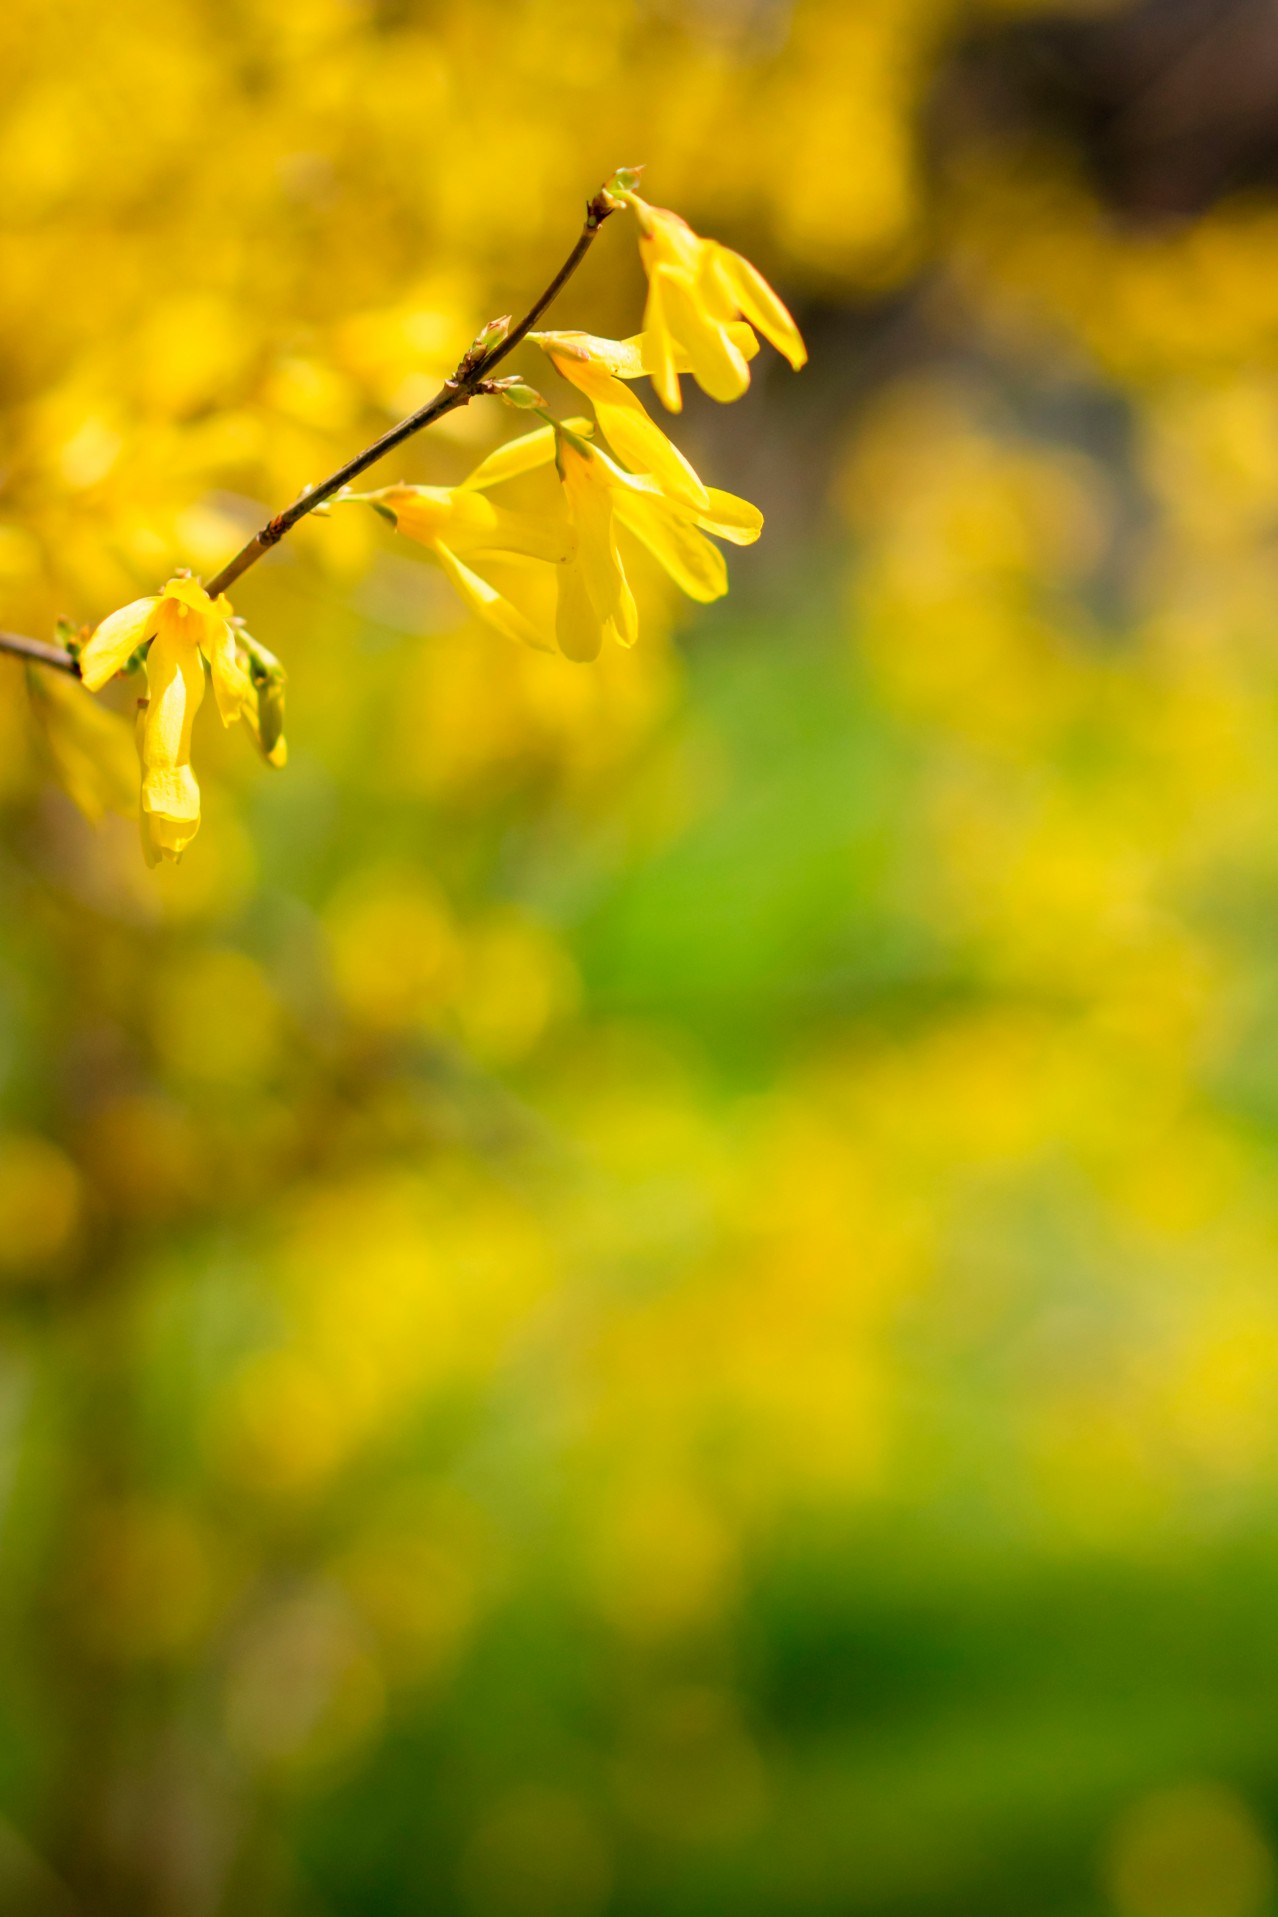 Nature wallpaper with yellow flowers on the tree branch